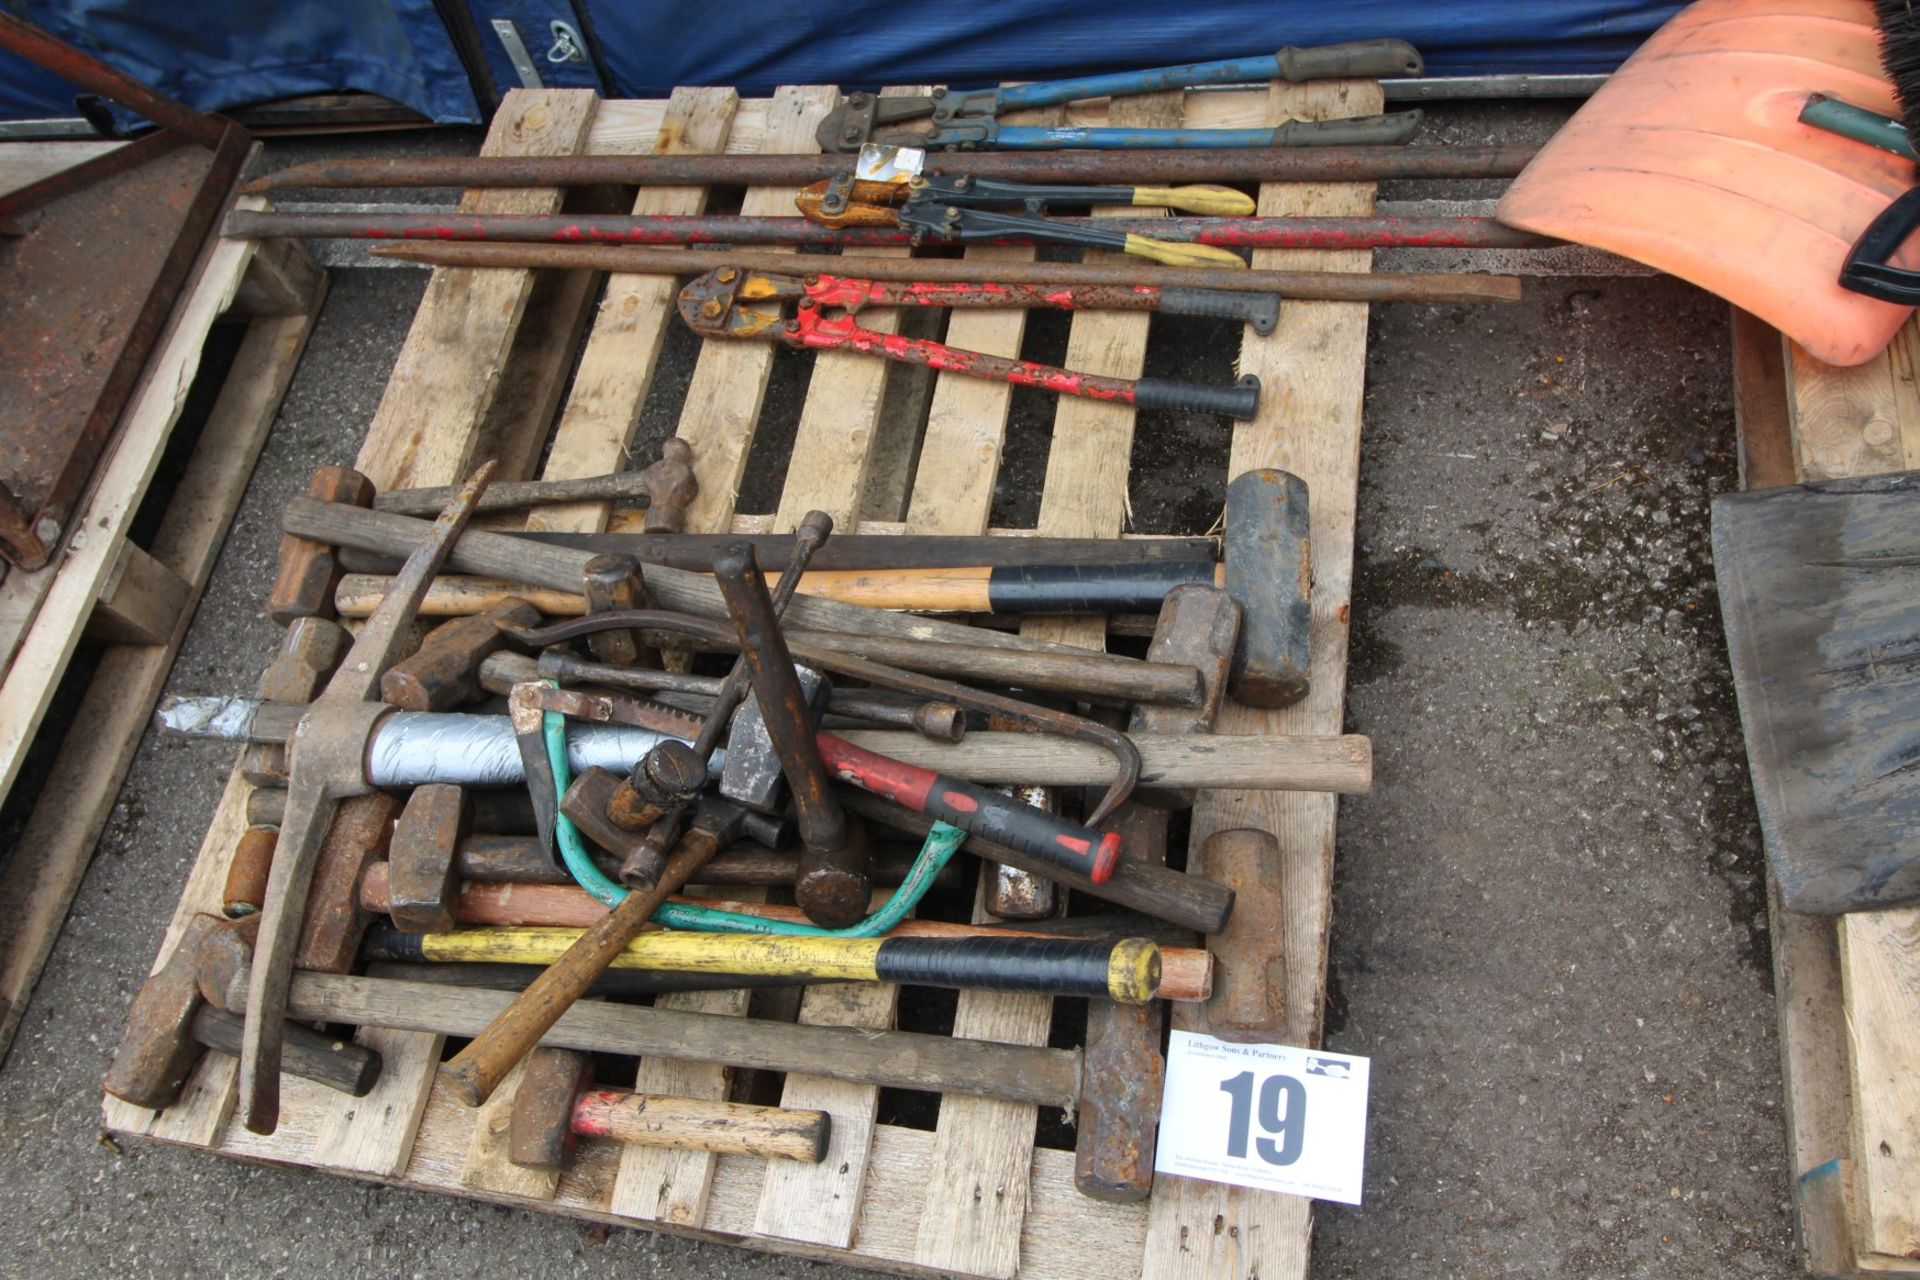 CONTENTS ON PALLET OF BOLT CROPPERS, PRY BARS, SLEDGE HAMMERS, PICK AXES & LUMP HAMMERS